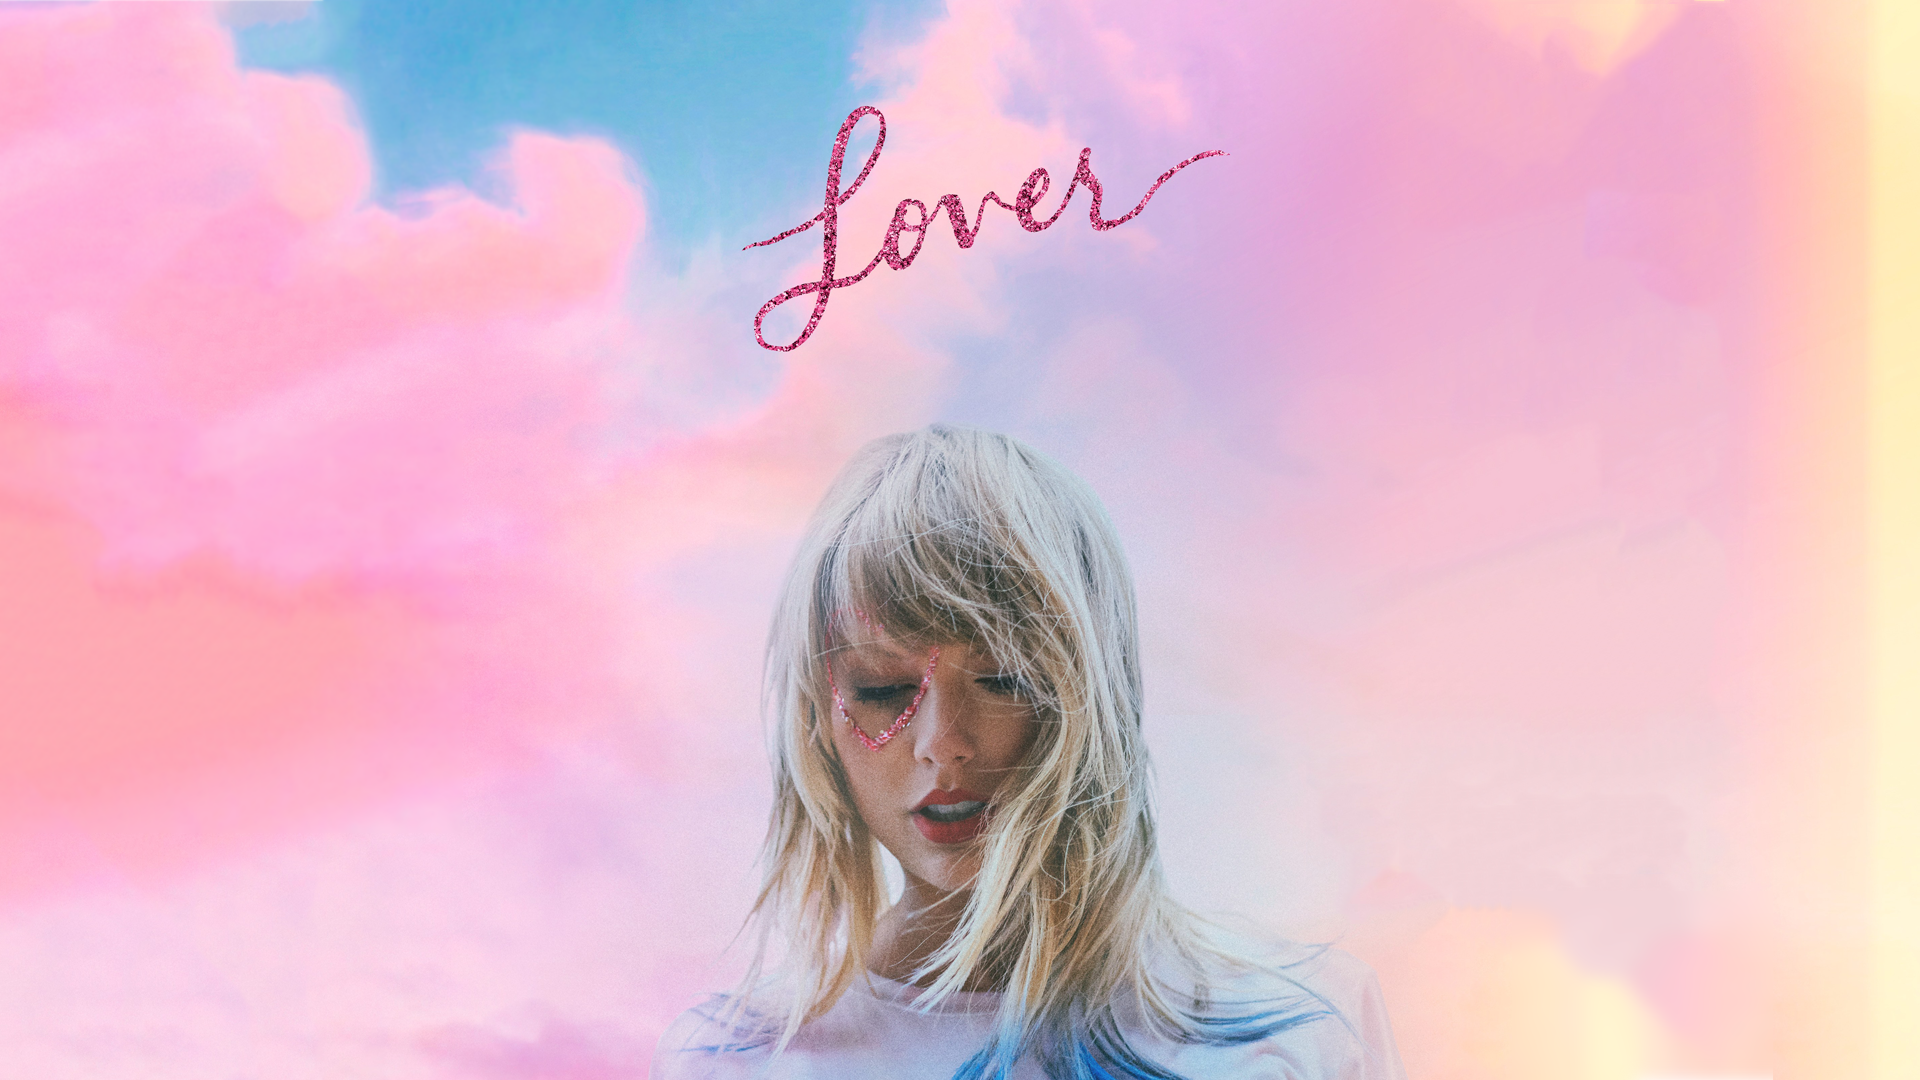 Cant stop listening to YNTCD so I made some Lover wallpapers